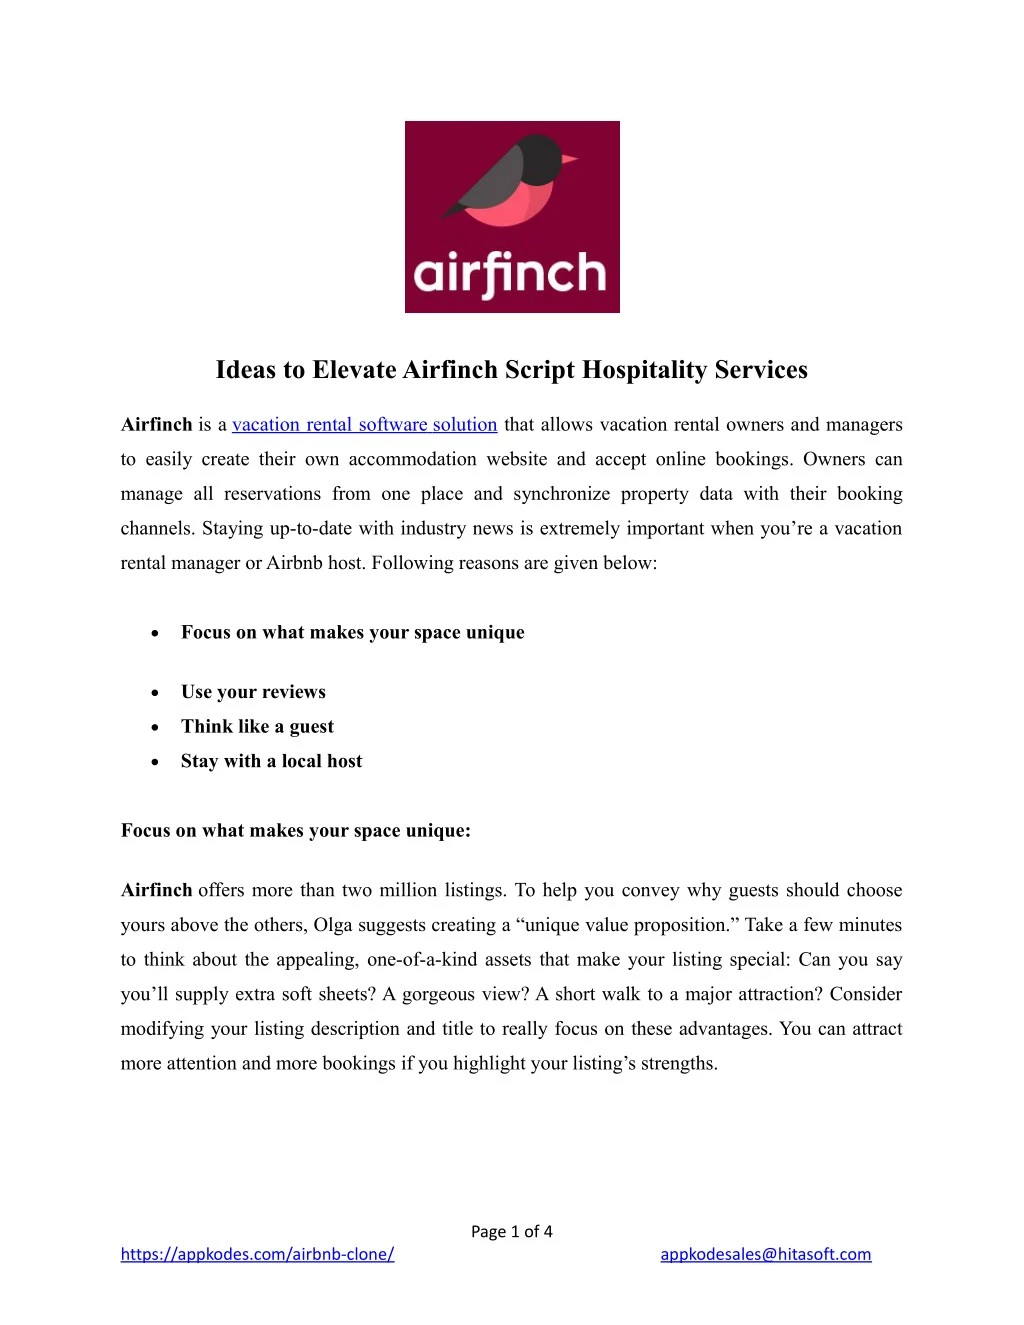 ideas to elevate airfinch script hospitality